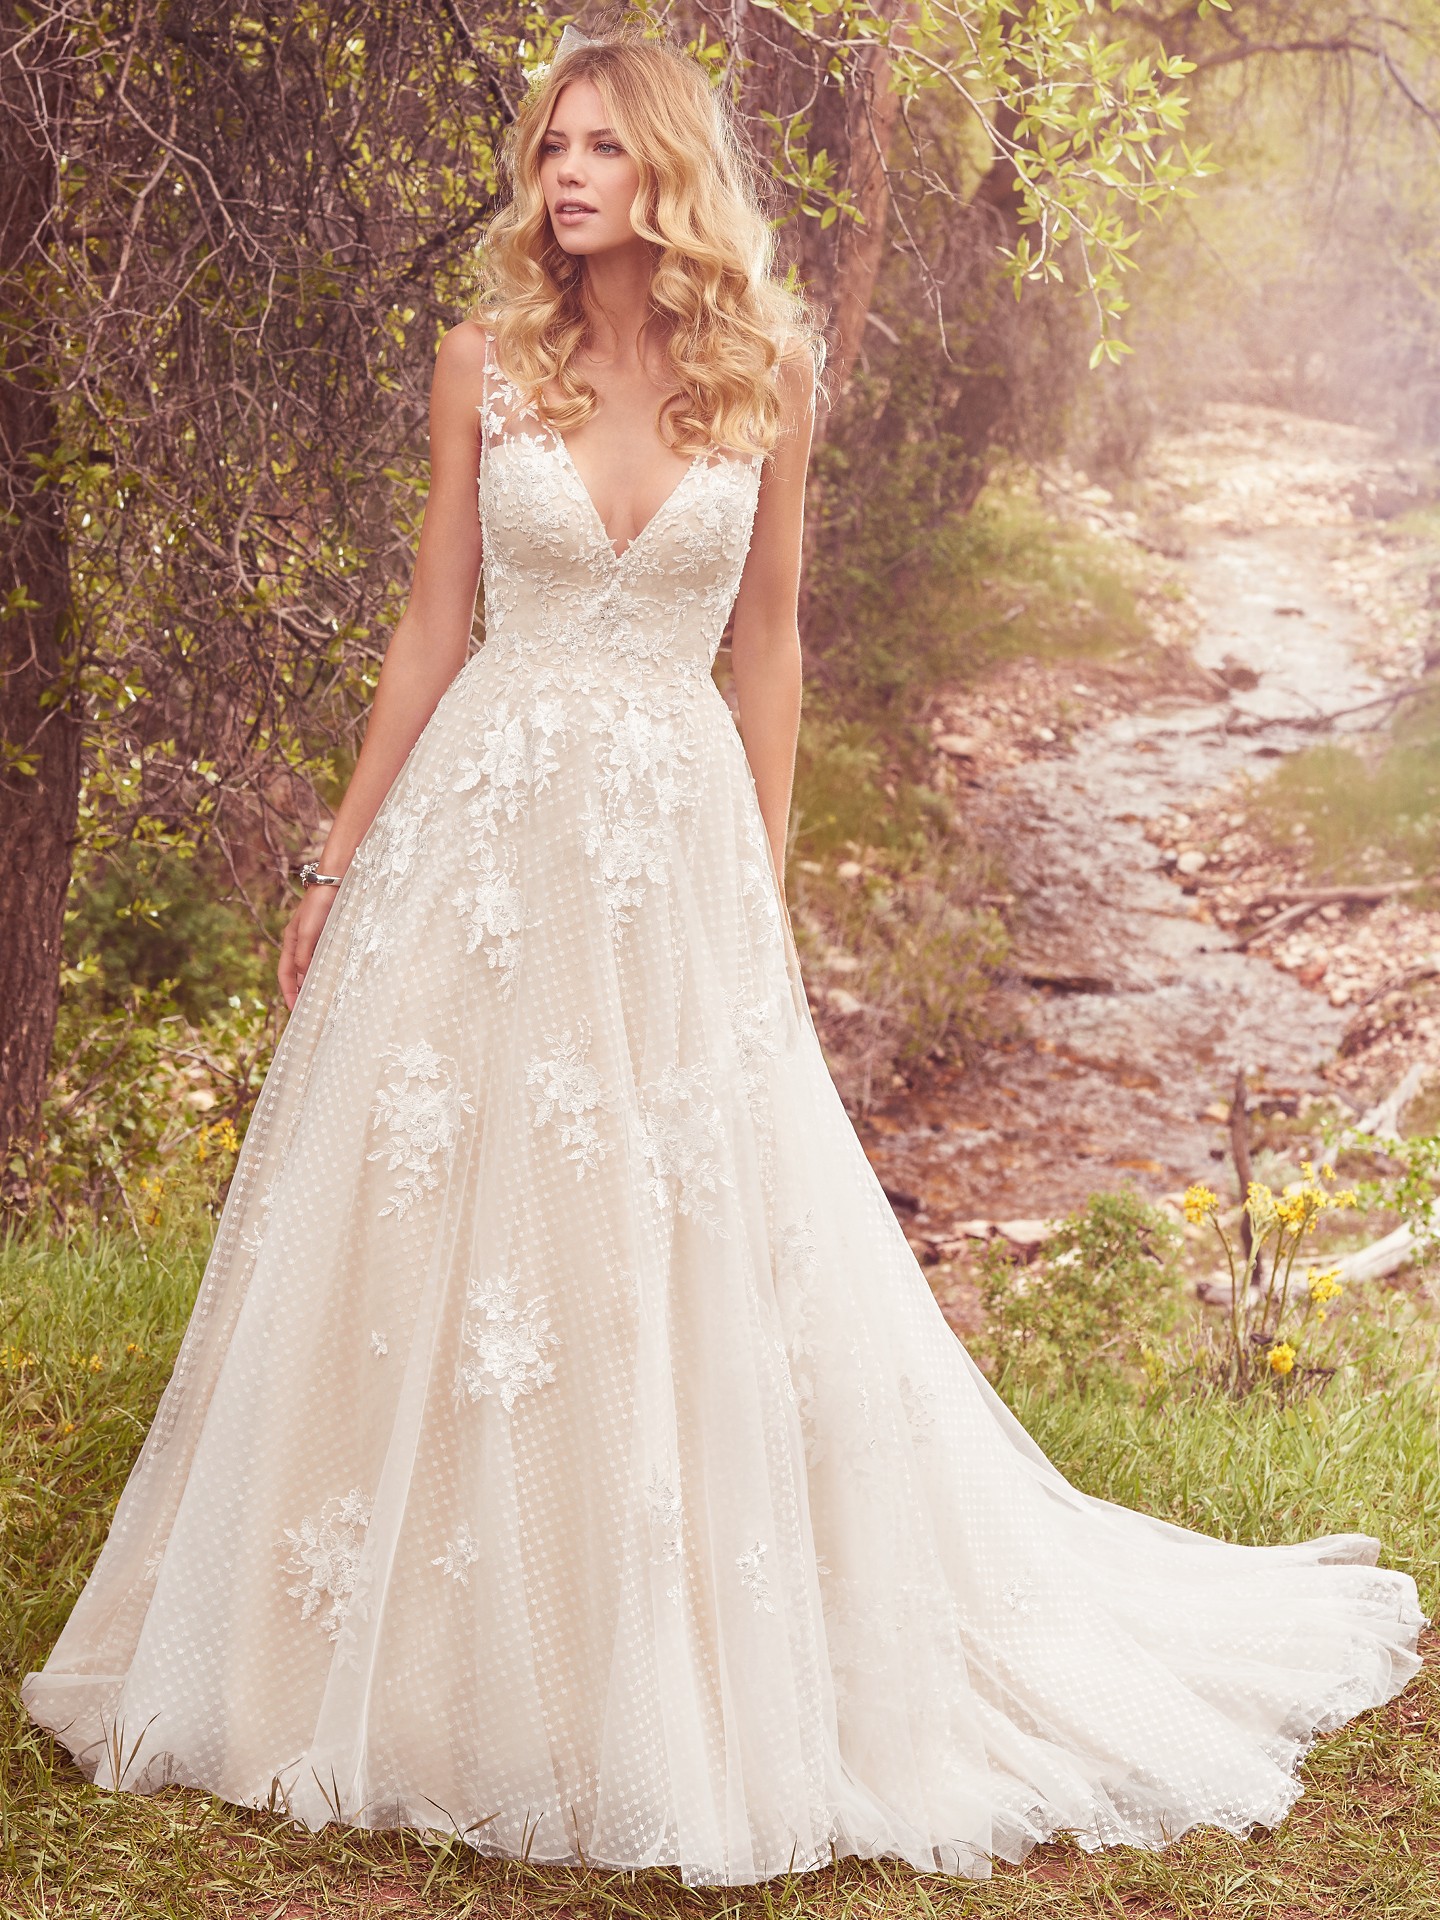  Seven Types of Lace Wedding Dresses To Know When Shopping For A Wedding Dress: Maggie Sottero's Lace Library. Meryl wedding dress by Maggie Sottero